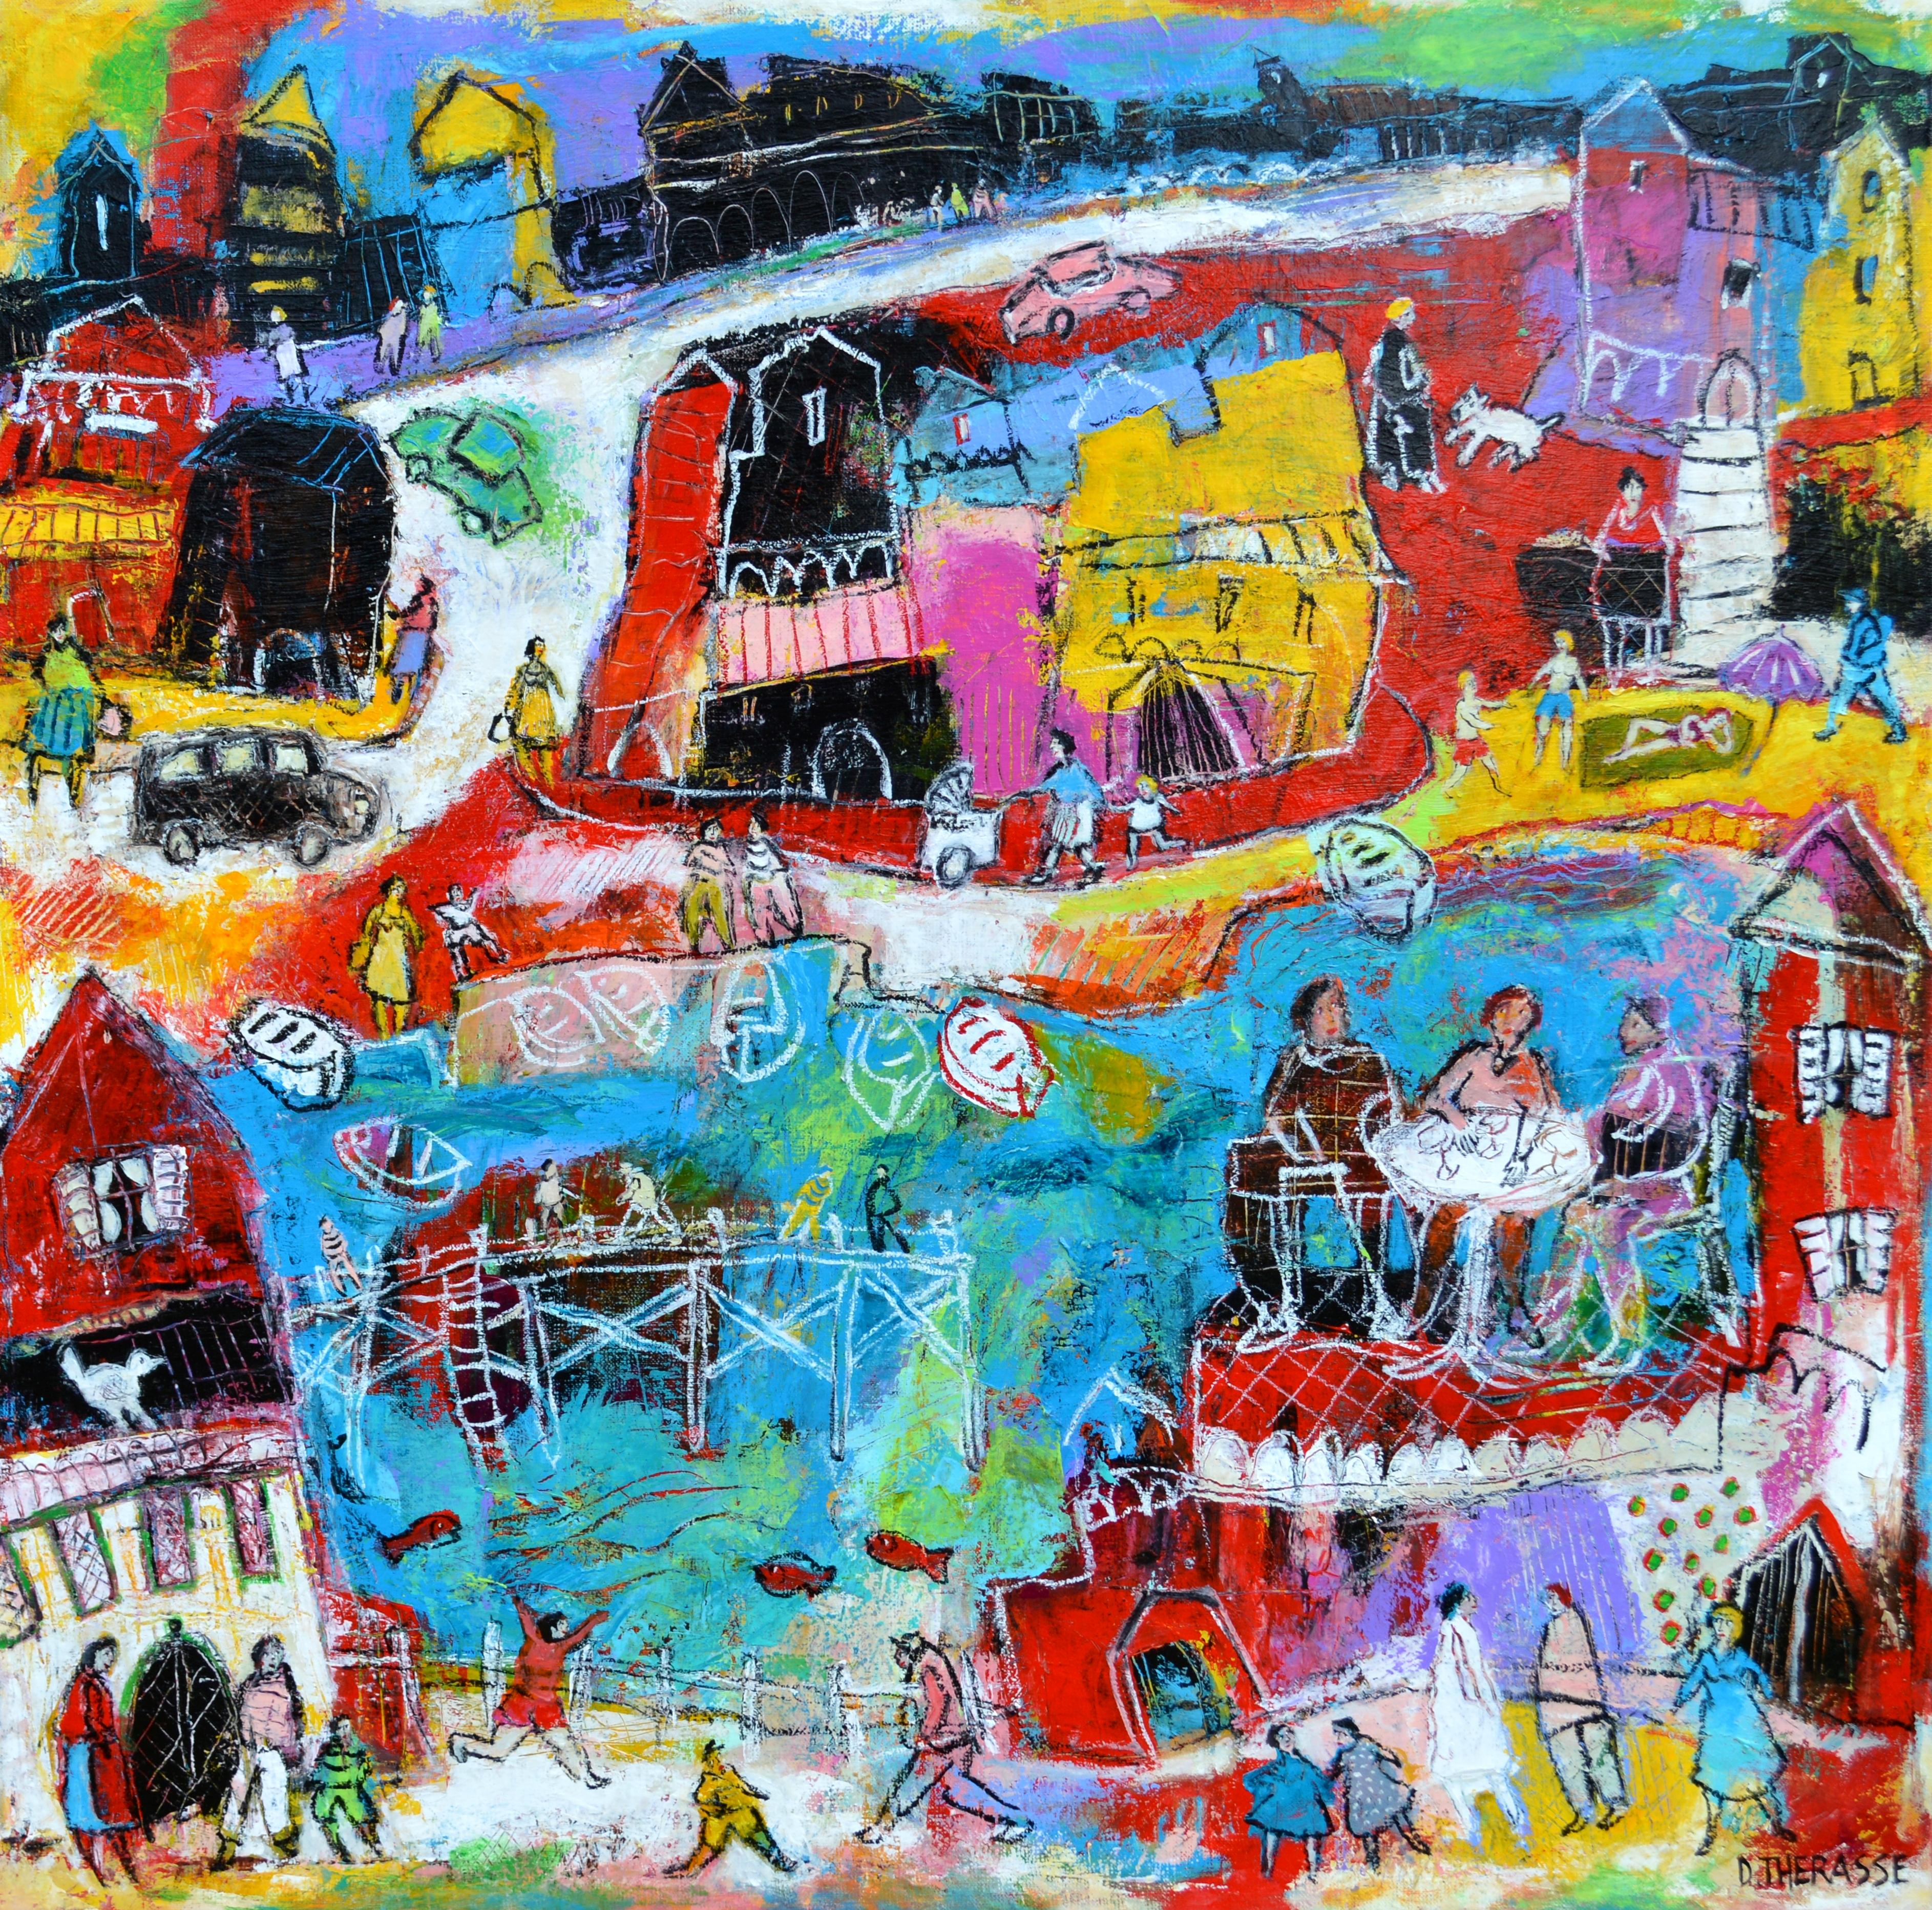 "The Port in Summer", Blue Red Yellow  Poetic Figuration Painting  - Mixed Media Art by Daniel Thérasse